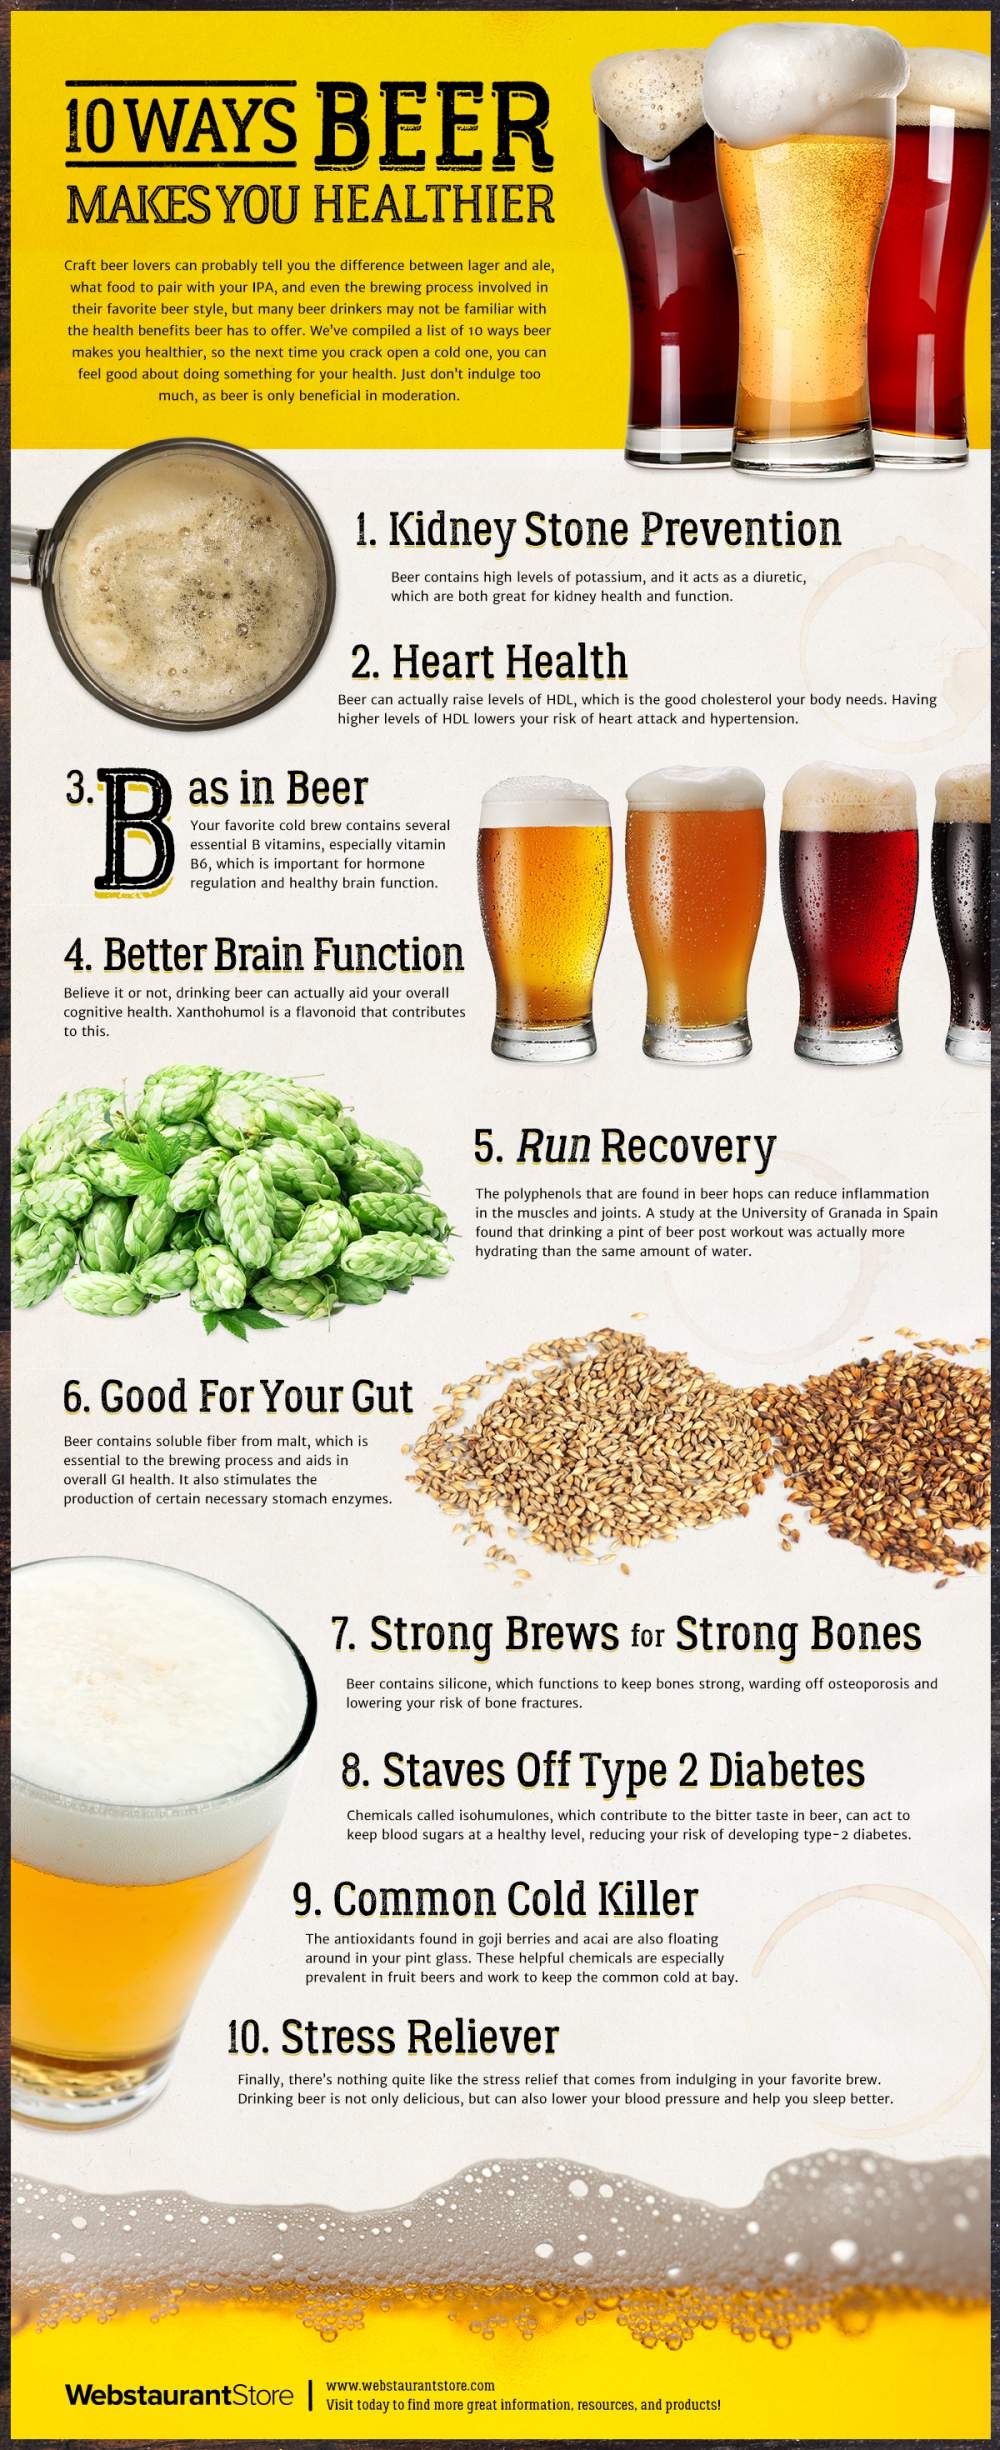 Beer Makes You Healthier